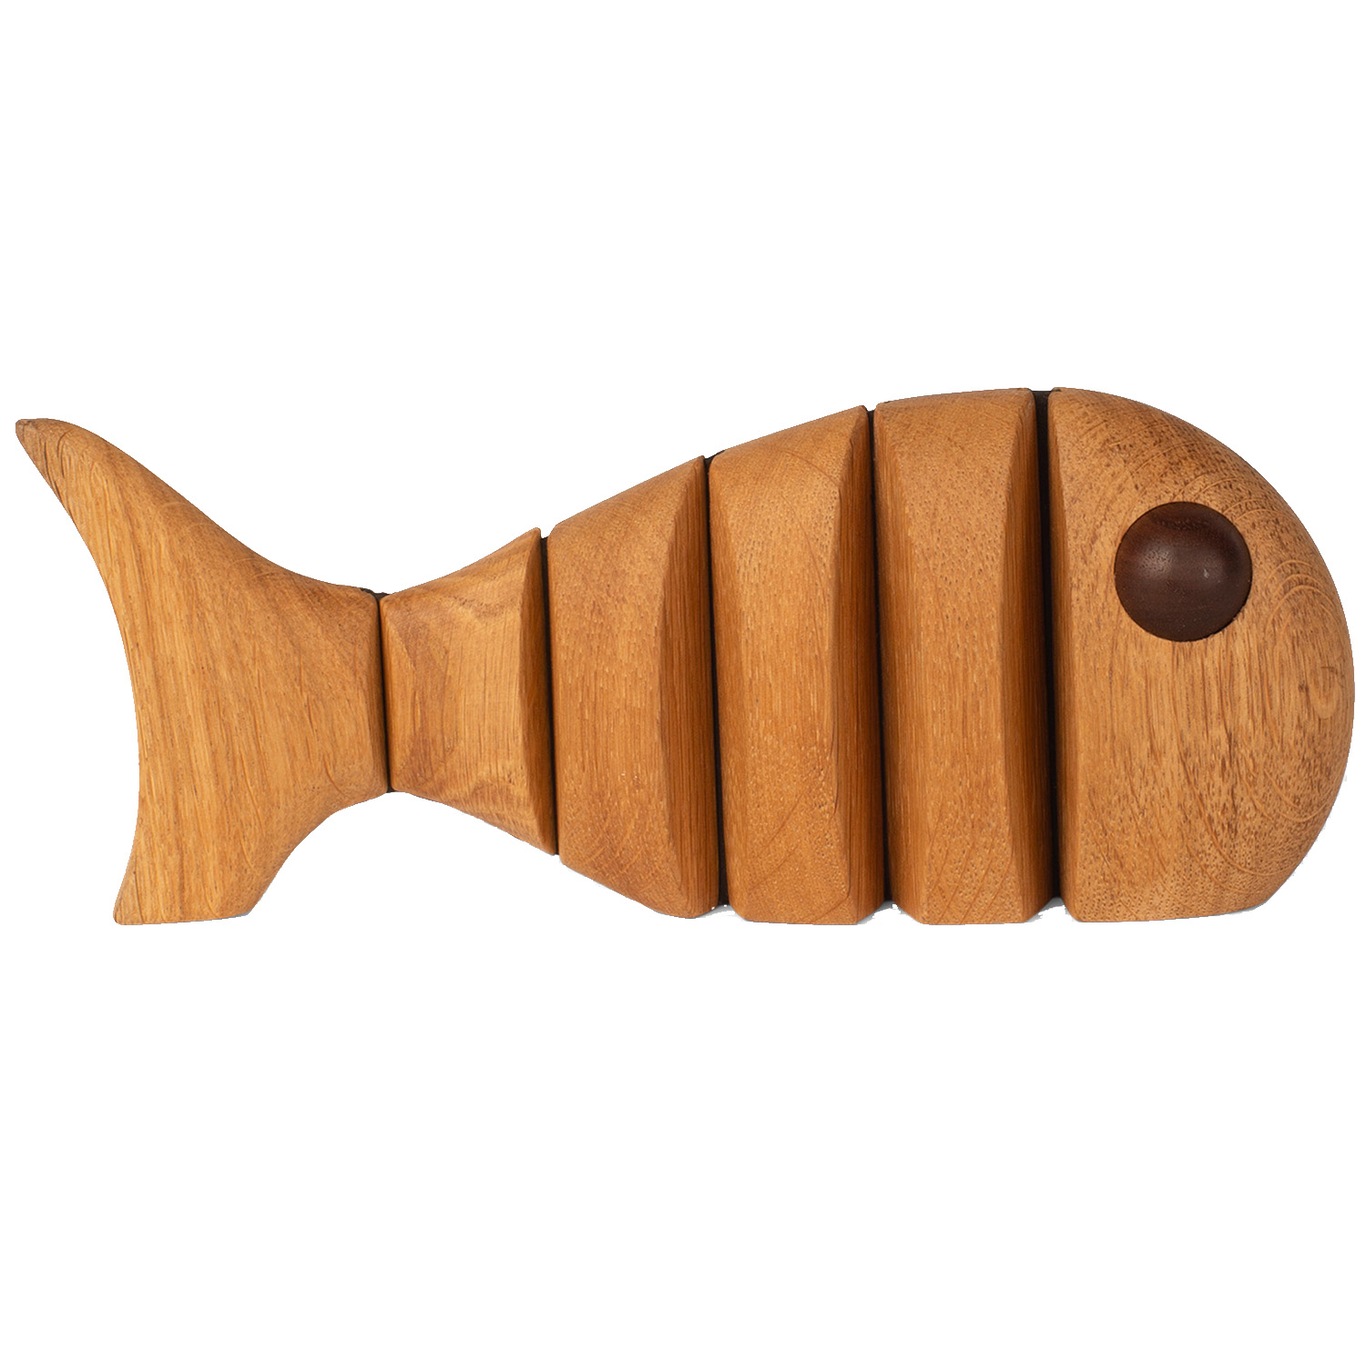 The Wood Fish Wooden Figurine 18 cm